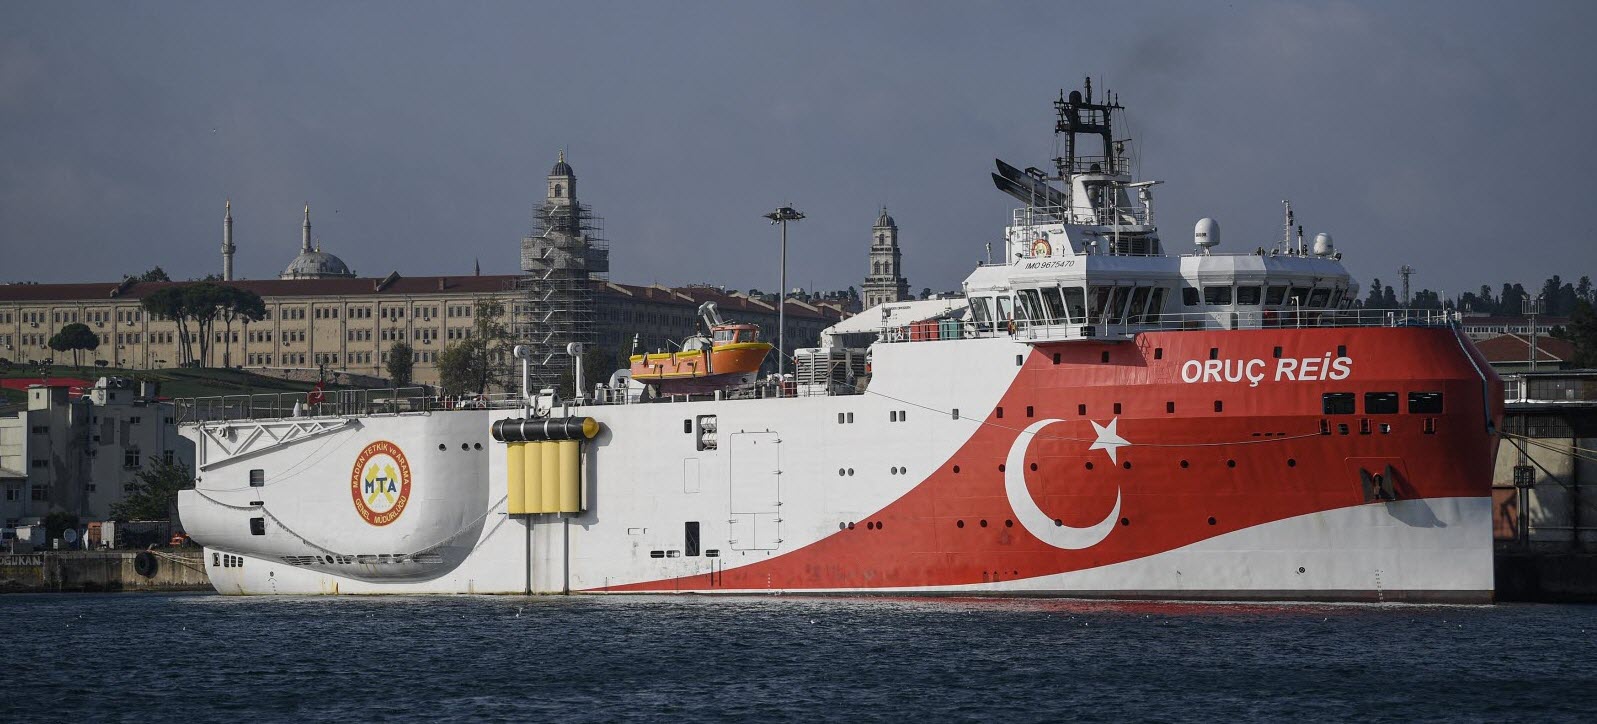 The Turkish research vessel Oruc Reis operated for subsea geophysical exploration.